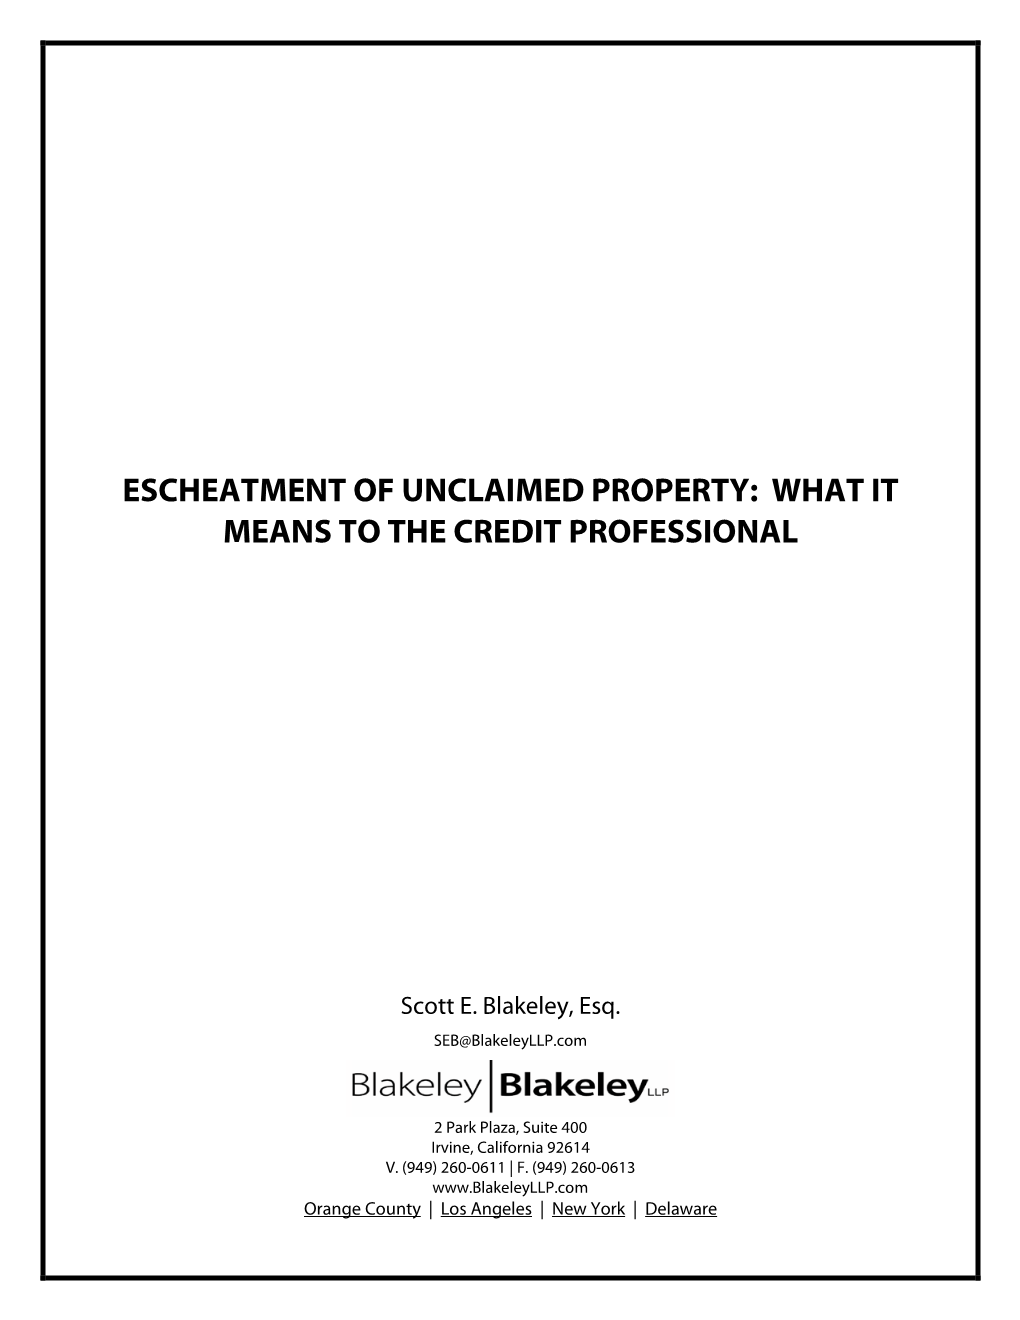 Escheatment of Unclaimed Property: What It Means to the Credit Professional